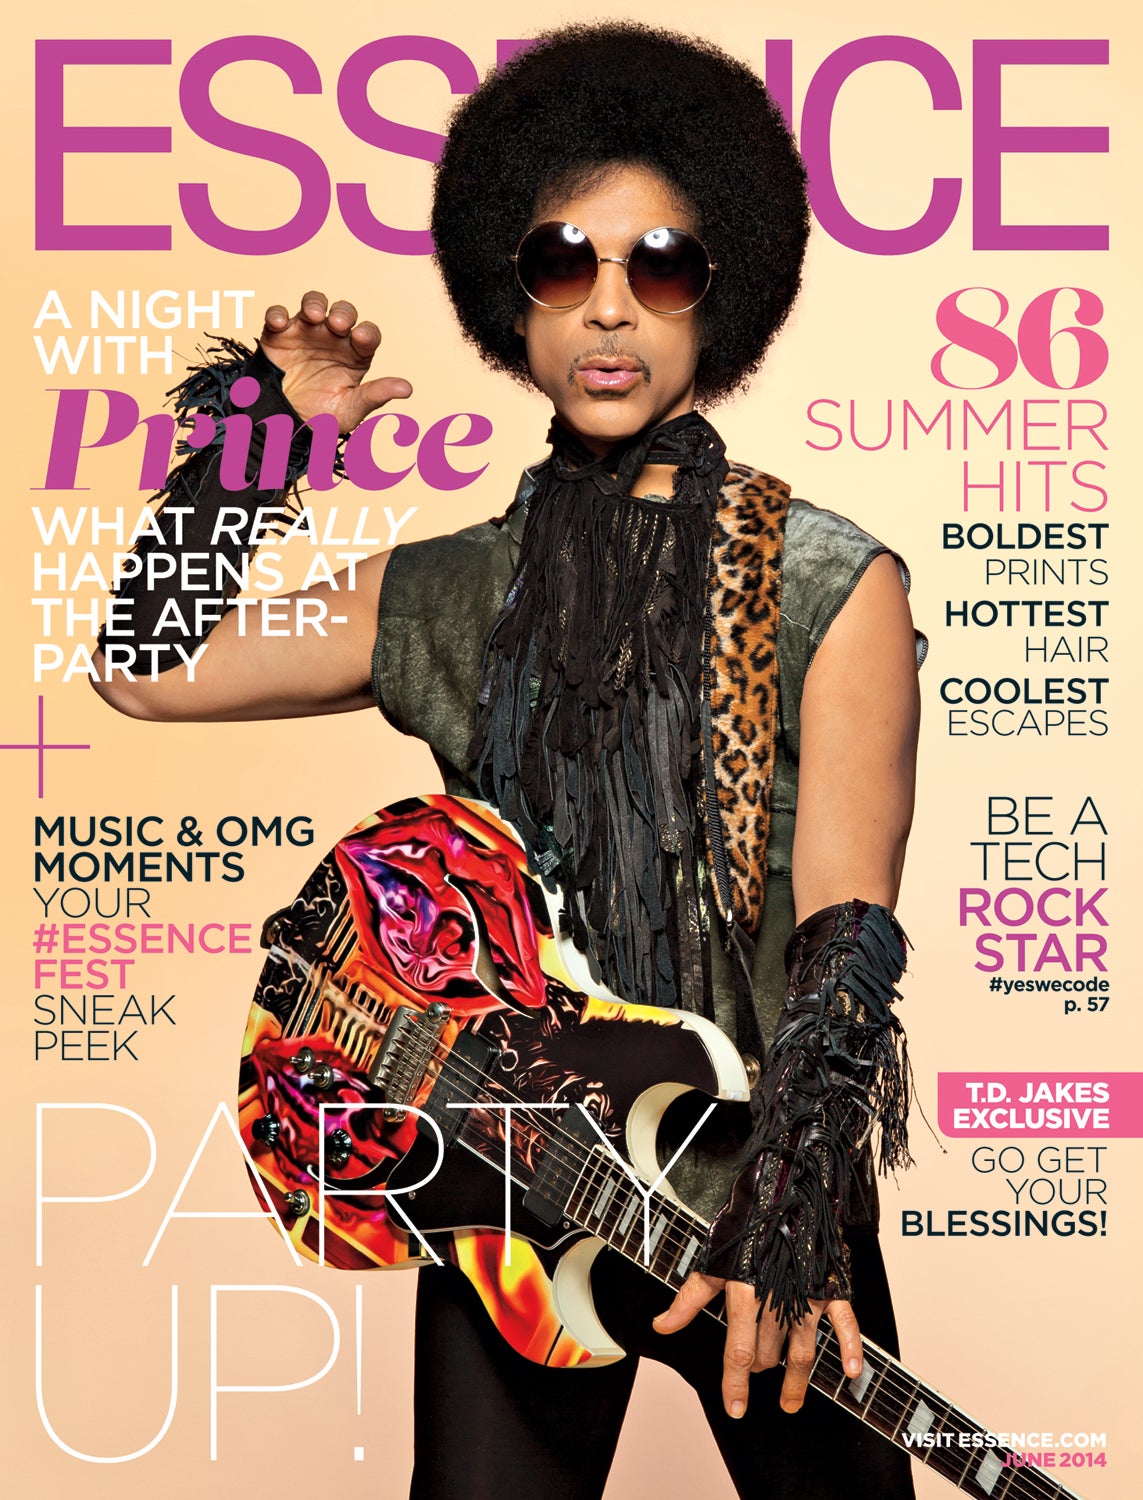 A Rare Prince Interview From the ESSENCE Archives | Essence